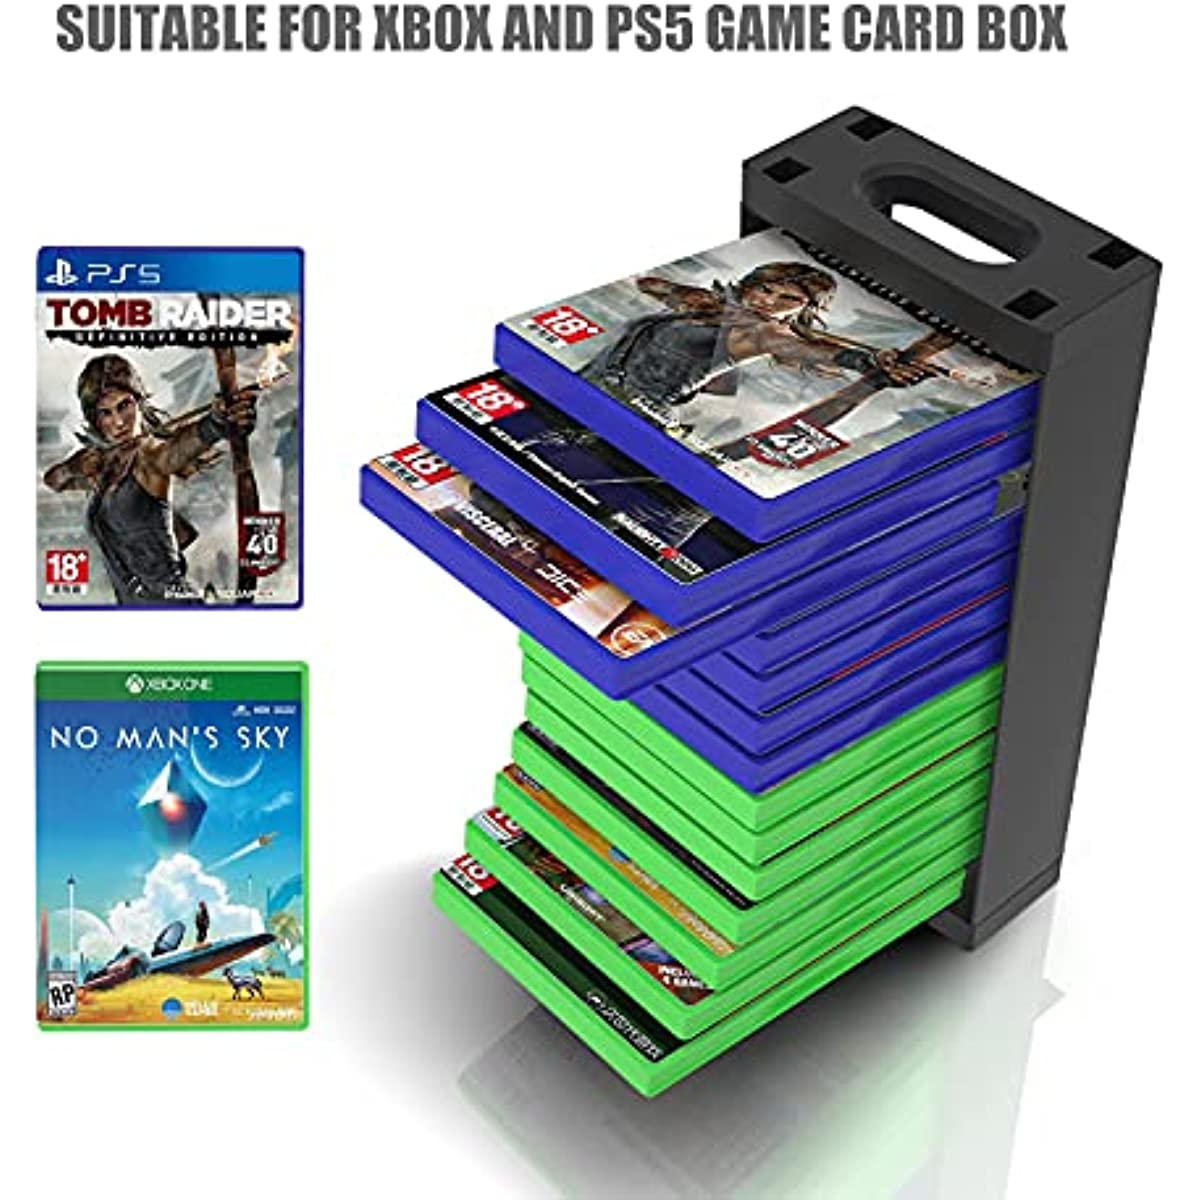 Xbox Game Card Case Storage Wall Mount, Xbox One Game Card Box Storage Stand Wall Mount Compatible with PS5 PS4 Games Xbox Series X/S Games (14 Game Boxes)